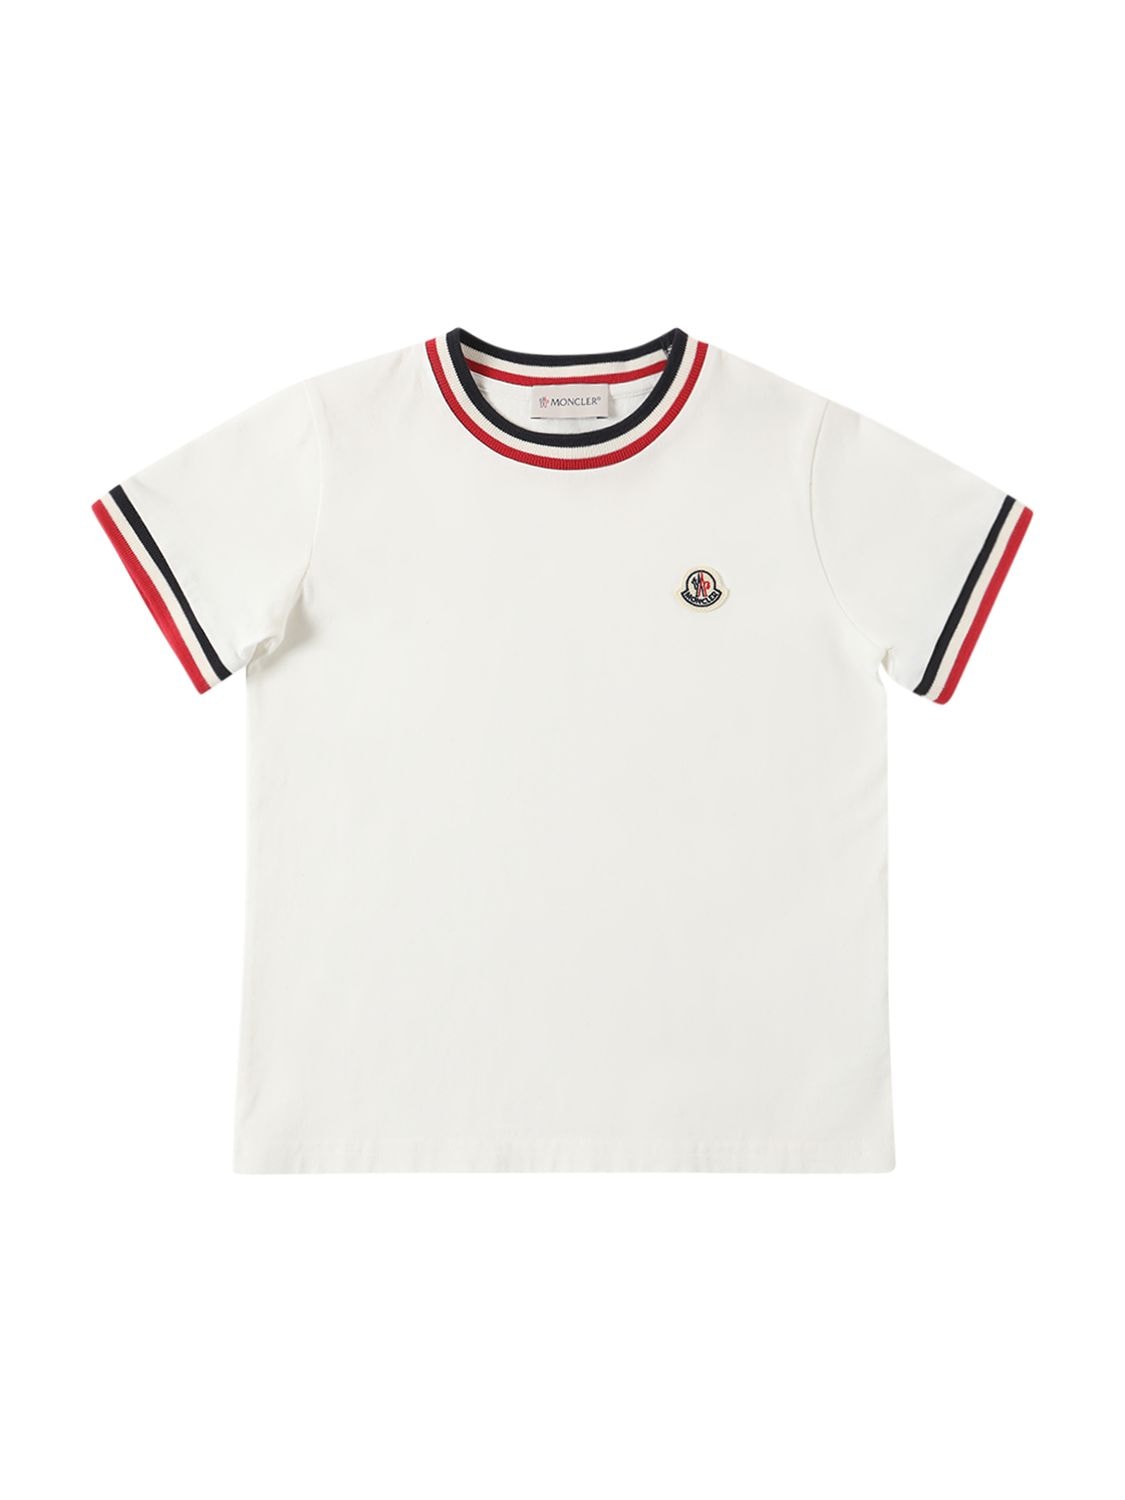 Image of Cotton Jersey Tricolor T-shirt